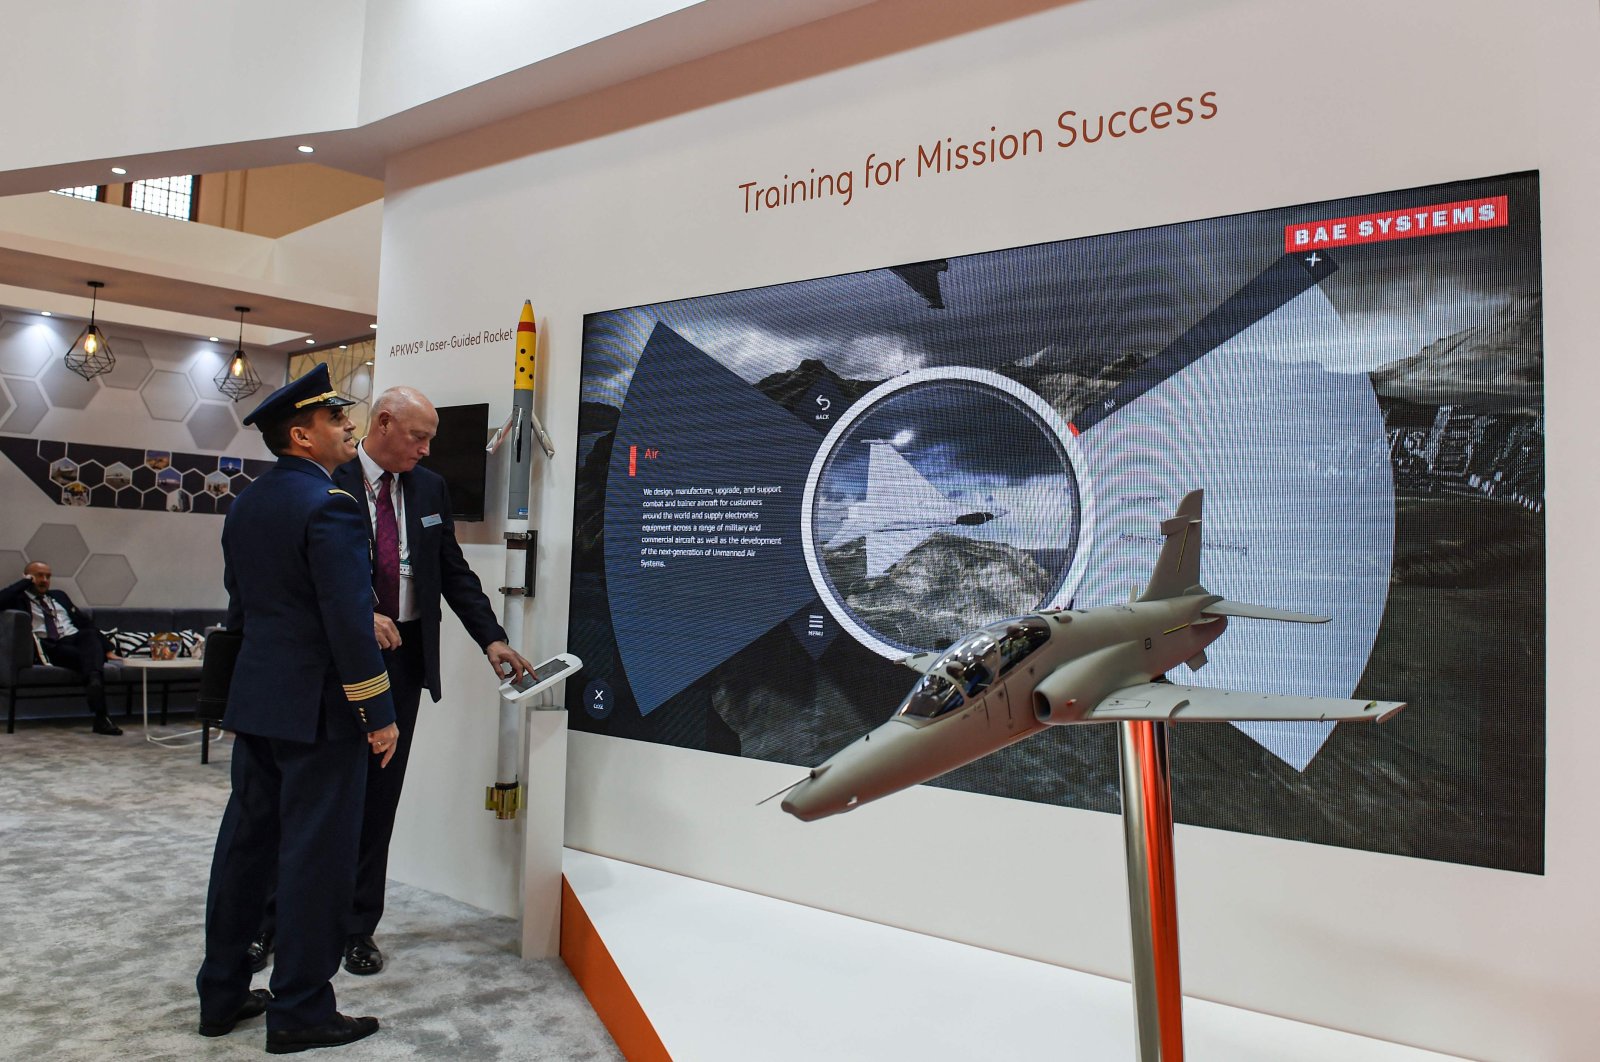 An unidentified military officer receives a briefing about pilot training solutions offered by BAE Systems at the Bahrain International Defence Exhibition &amp; Conference (BIDEC), in the capital Manama, Bahrain, Oct. 29, 2019. (AFP Photo)